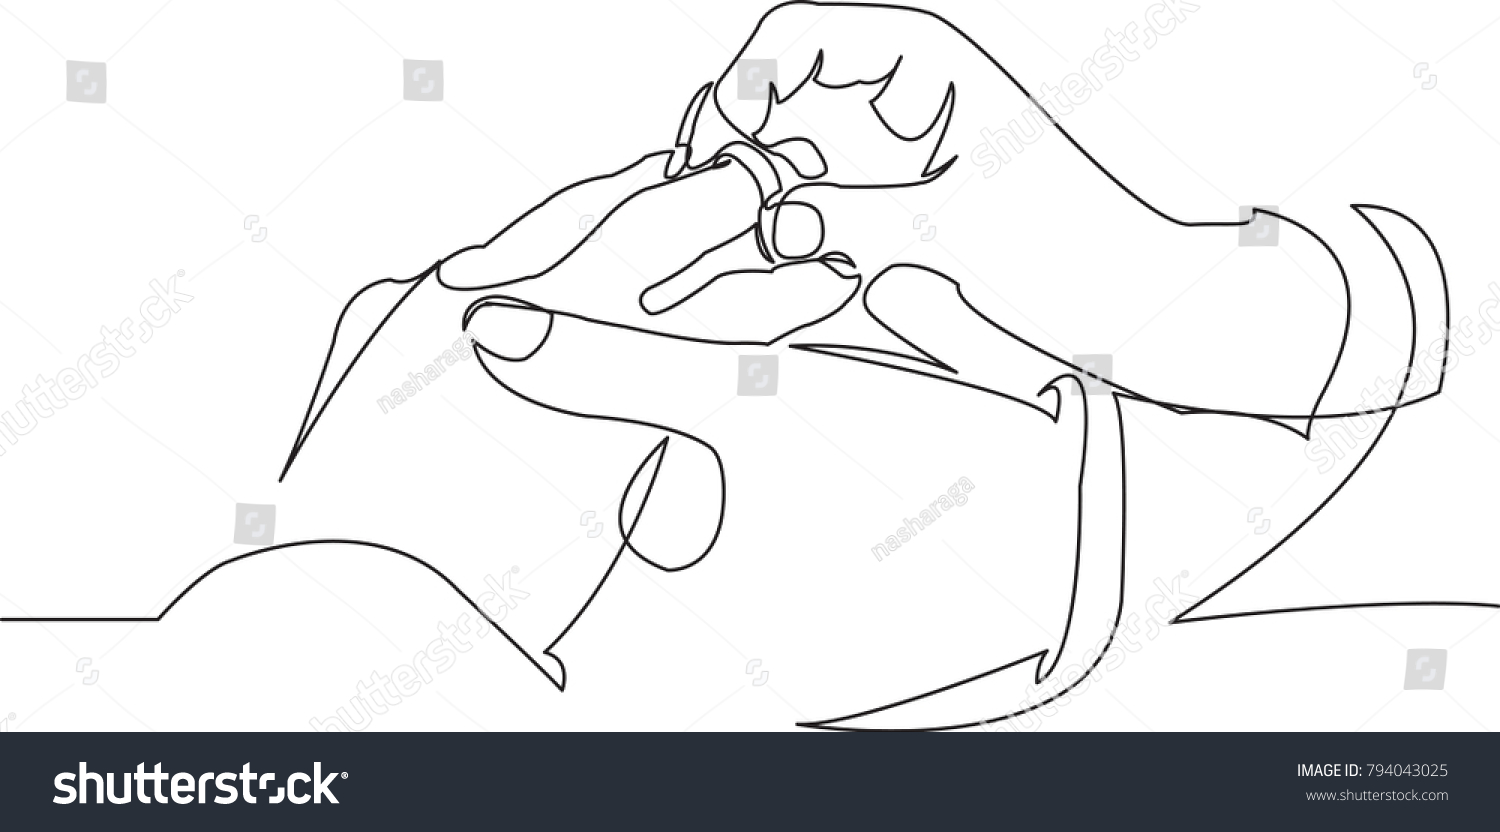 SVG of one continuous drawn line love marriage marriage symbol drawn by hand picture silhouette. line art. ring exchange ritual svg